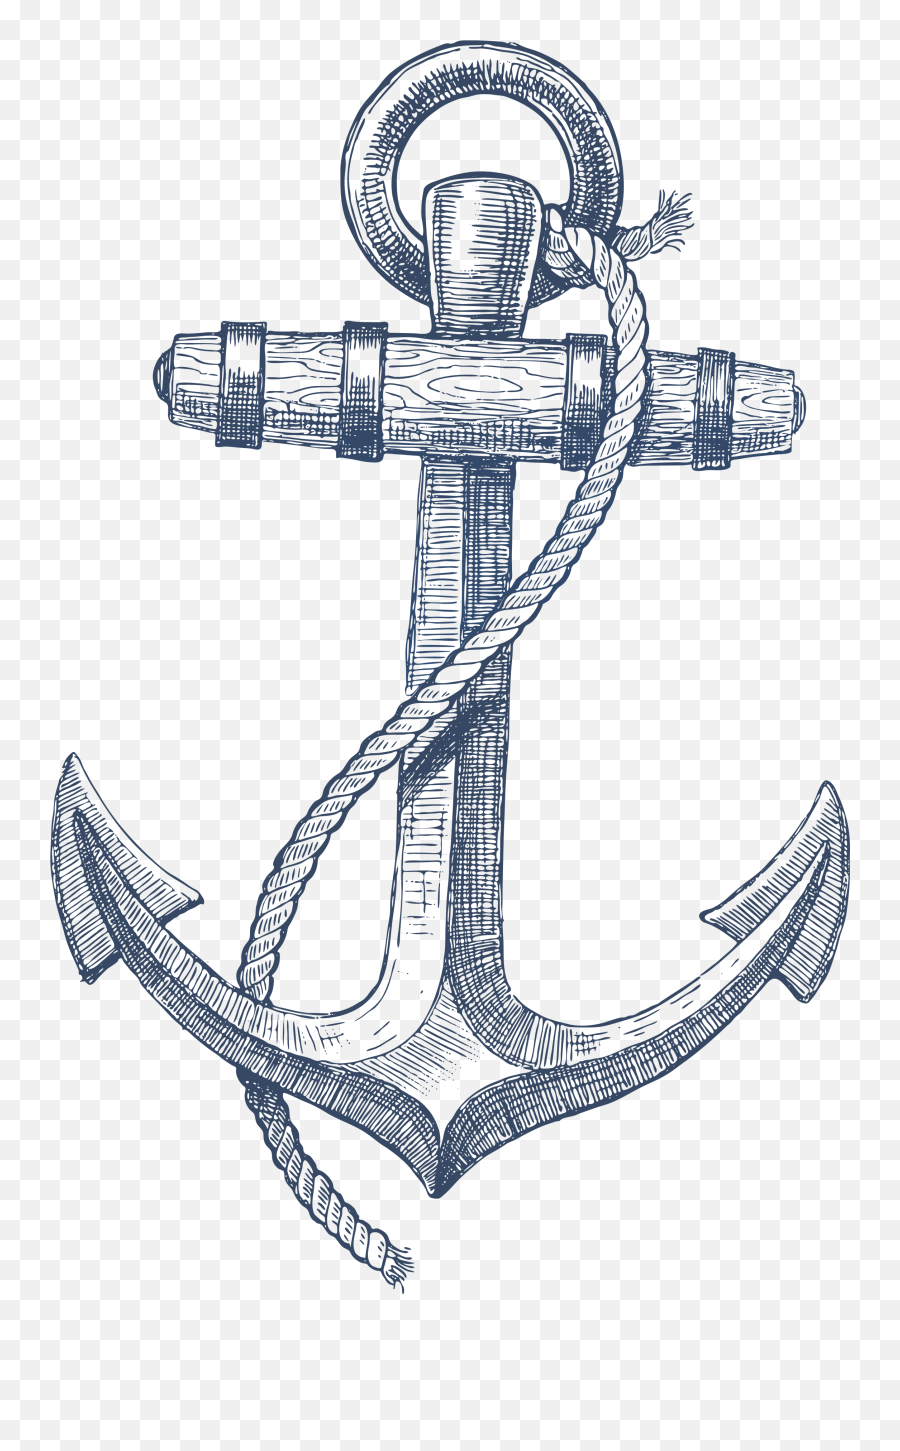 Nautical Anchor Png Transparent Picture - Ship Anchor Drawing Emoji,Nautical Emojis Anchor